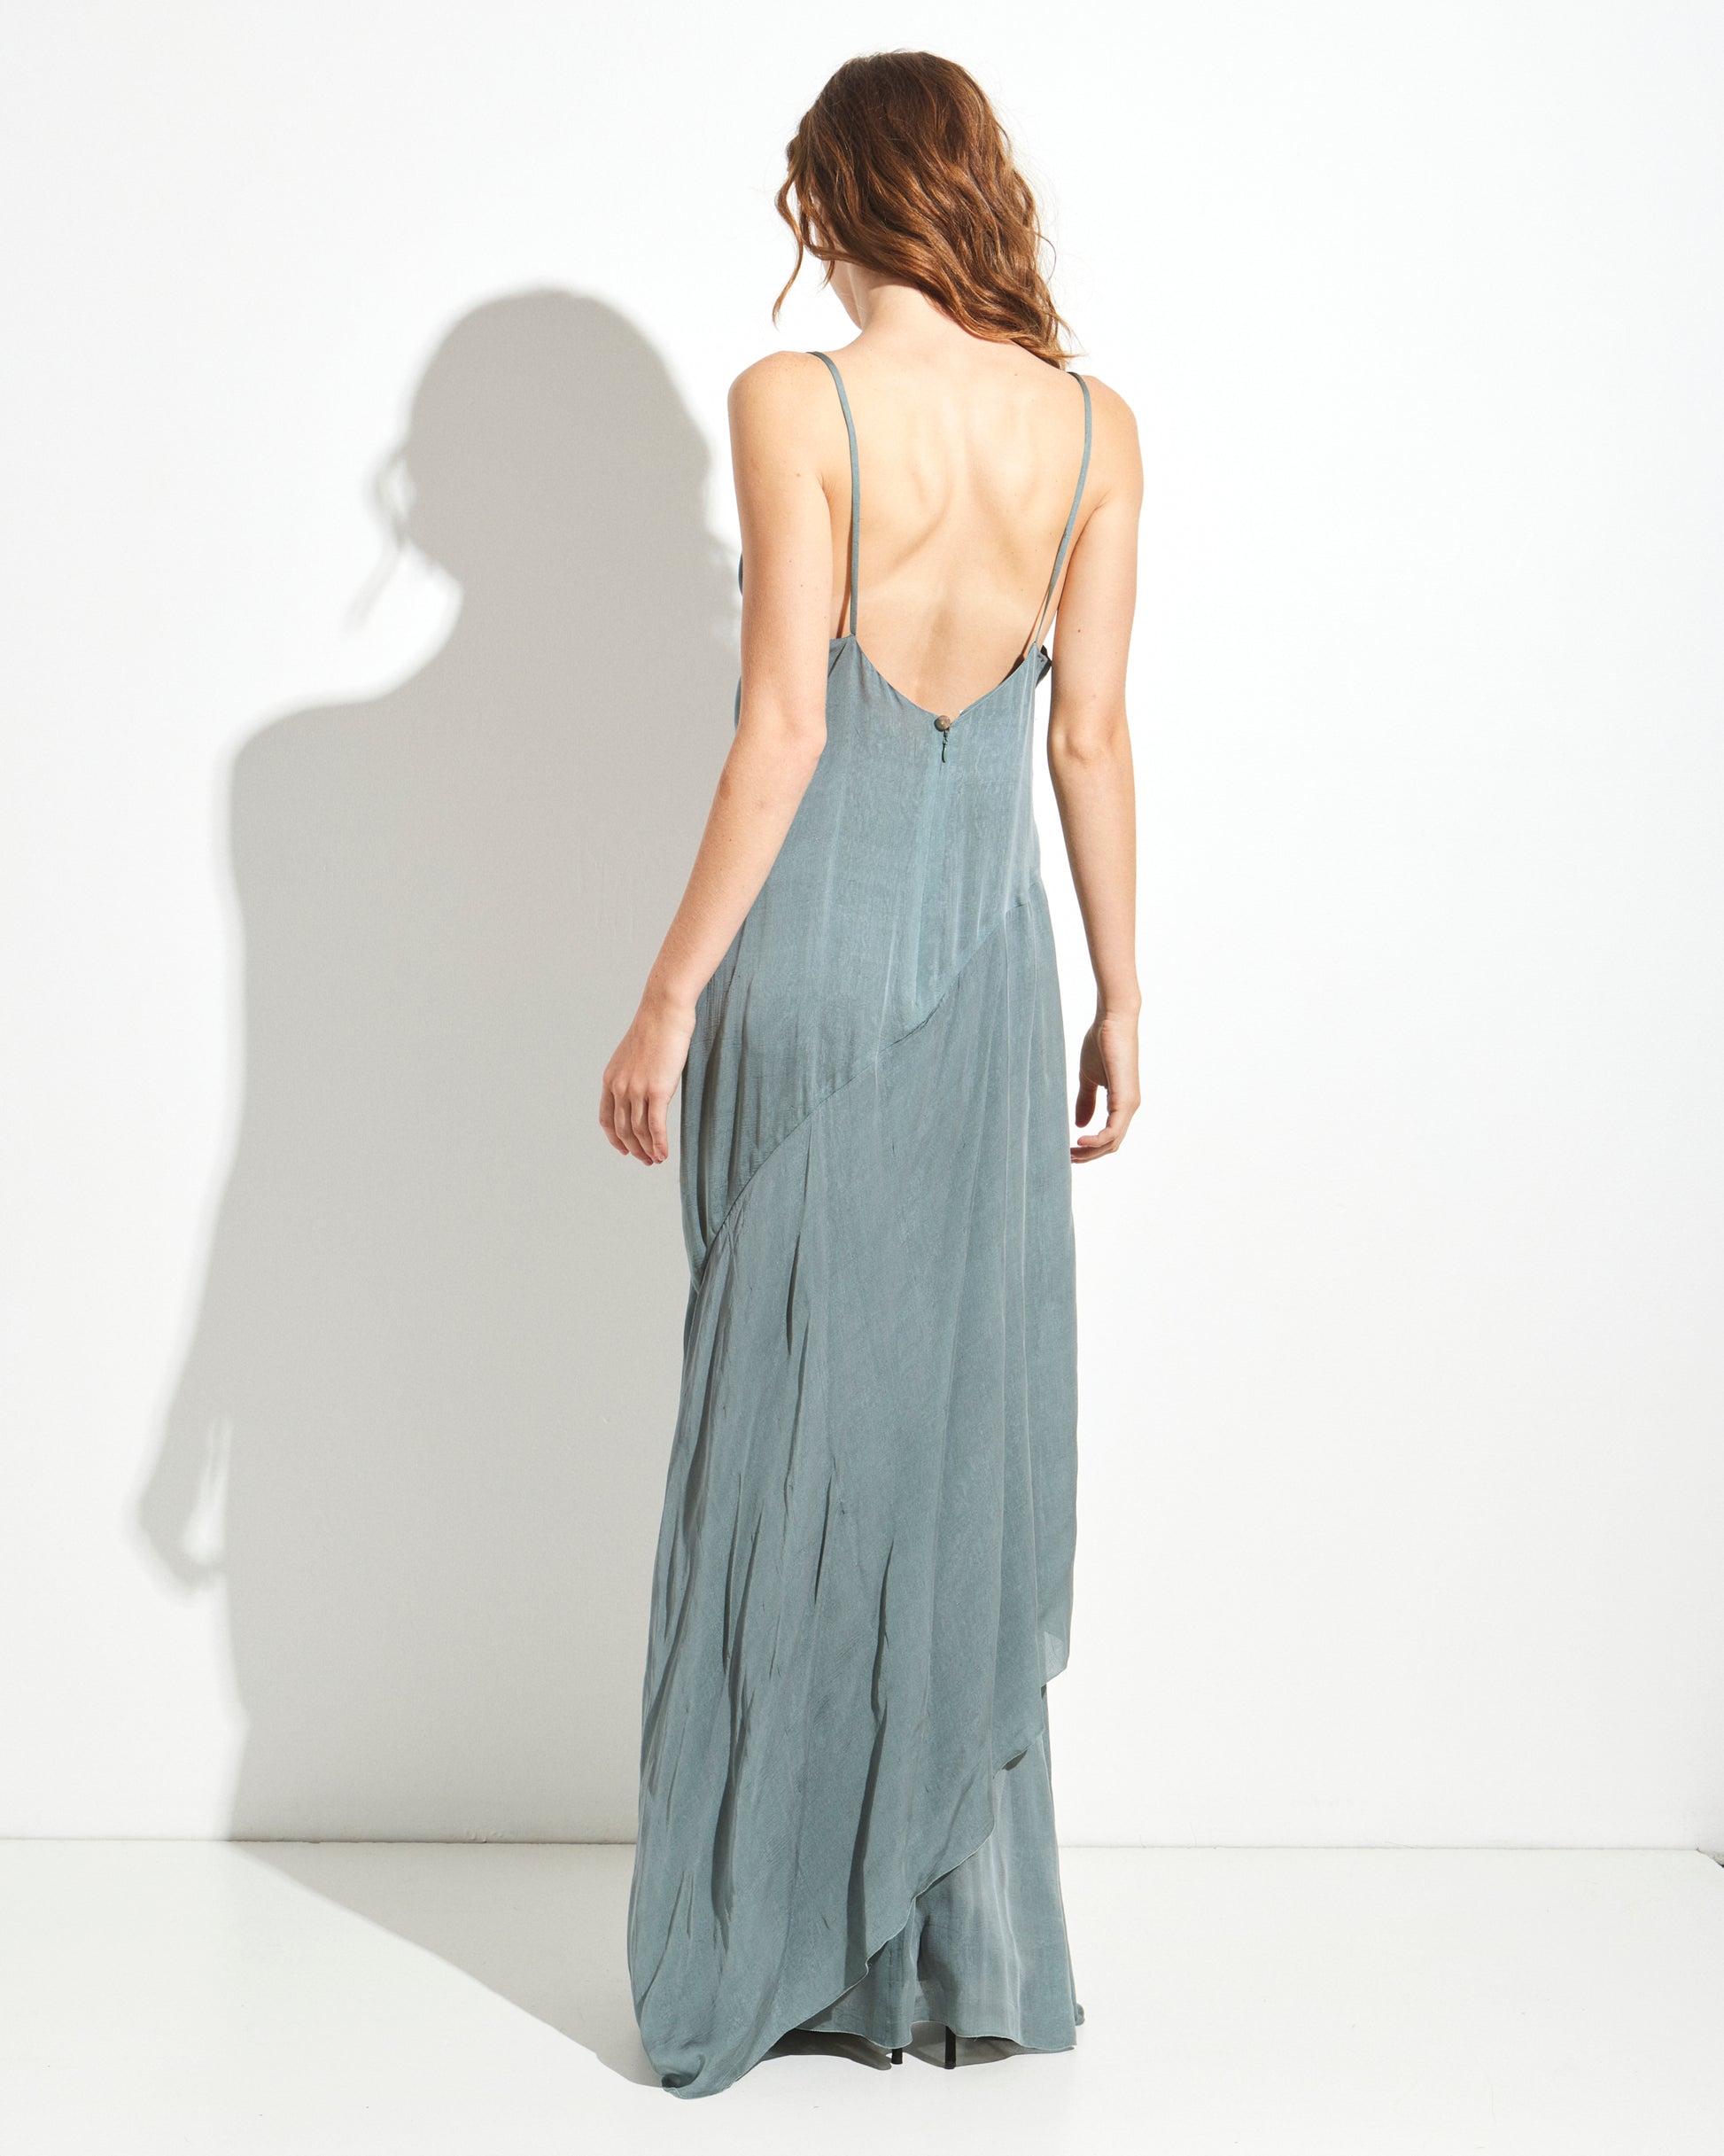 Chanel Evening Slip Dress with Sequin Embellishment